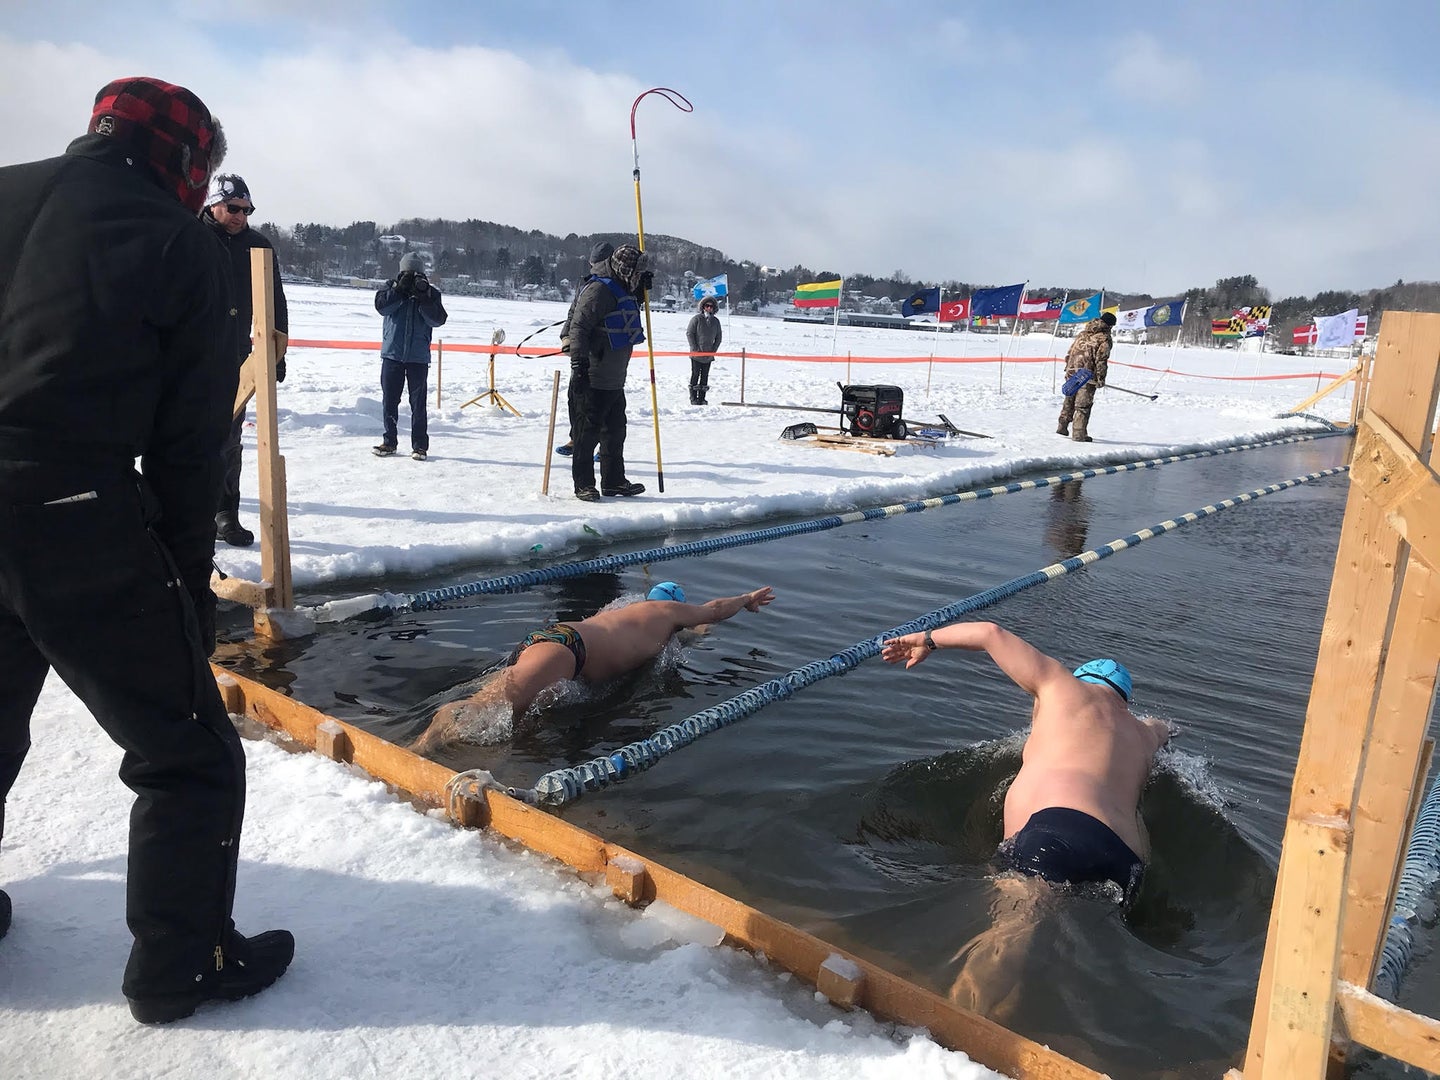 Ice swimmers at the 2020 Memphremagog Winter Swimming Festival in Vermont.